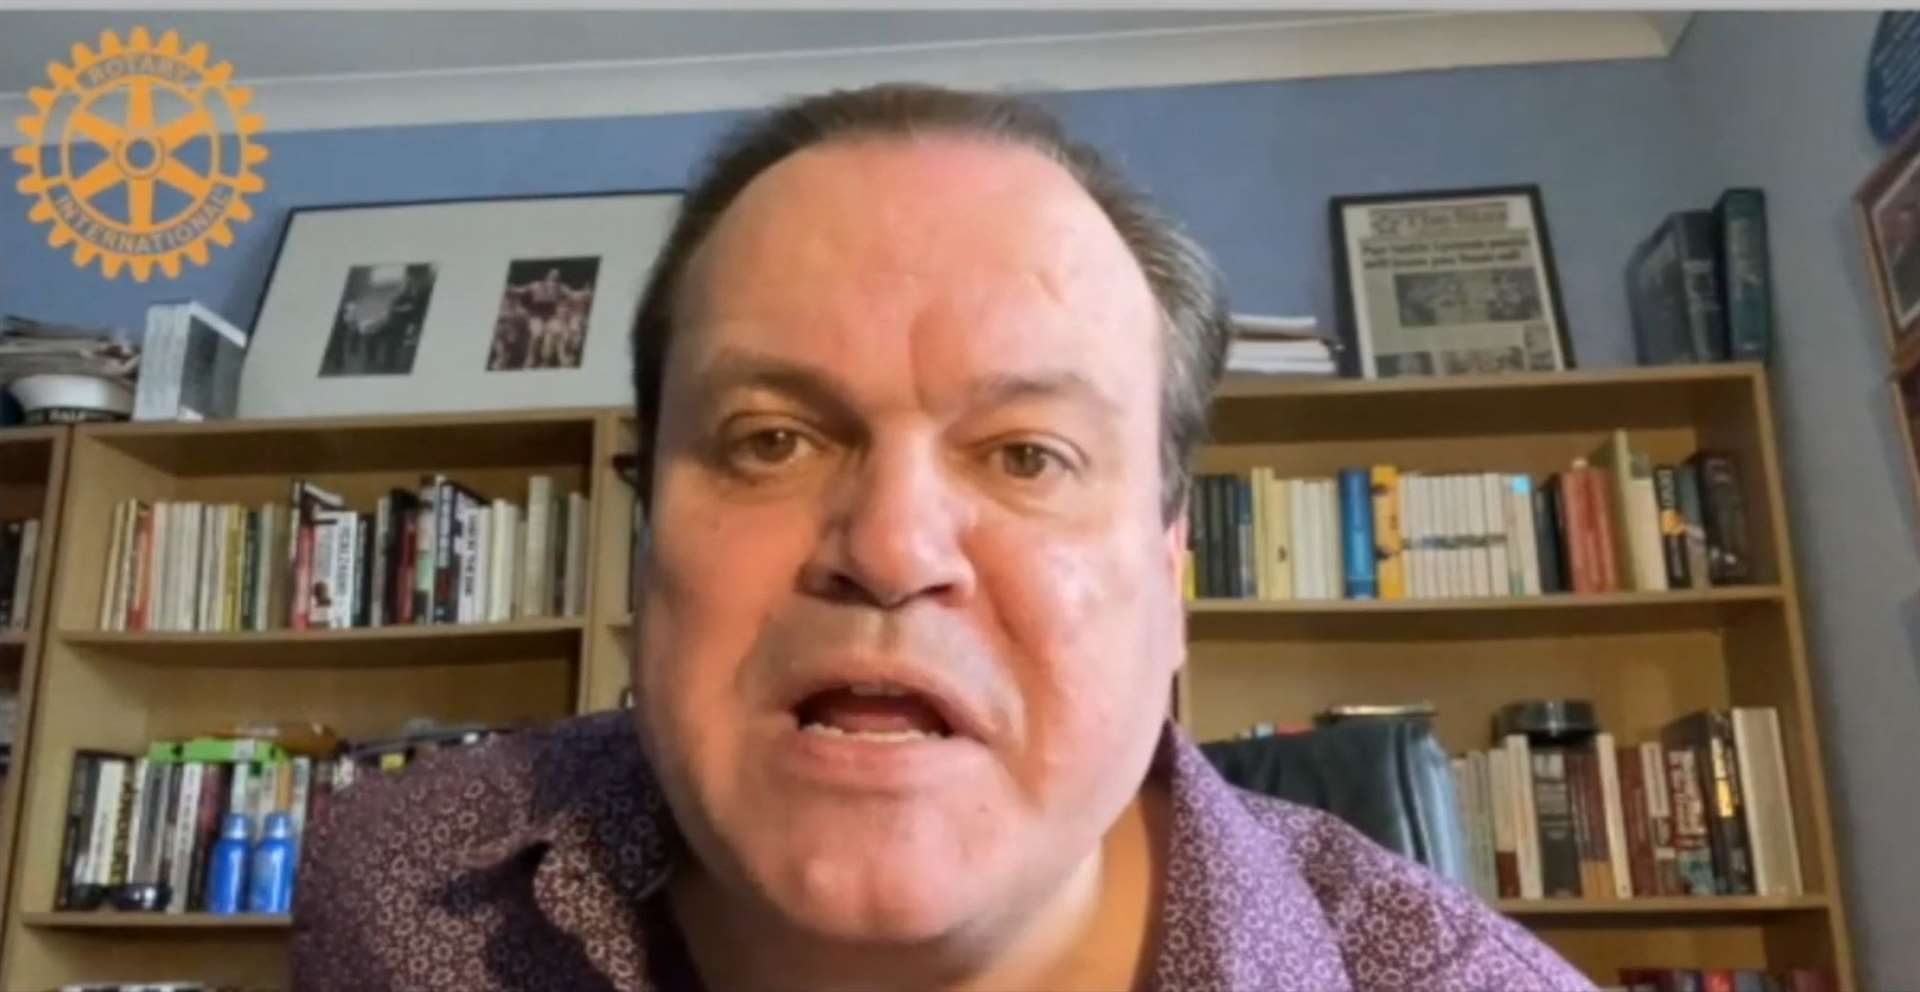 Sheppey-based Shaun Williamson, former Barry Evans in EastEnders, performed sit-down comedy in the virtual Rotary Variety Show which raised £800 for Minster-on-Sea Rotary Club